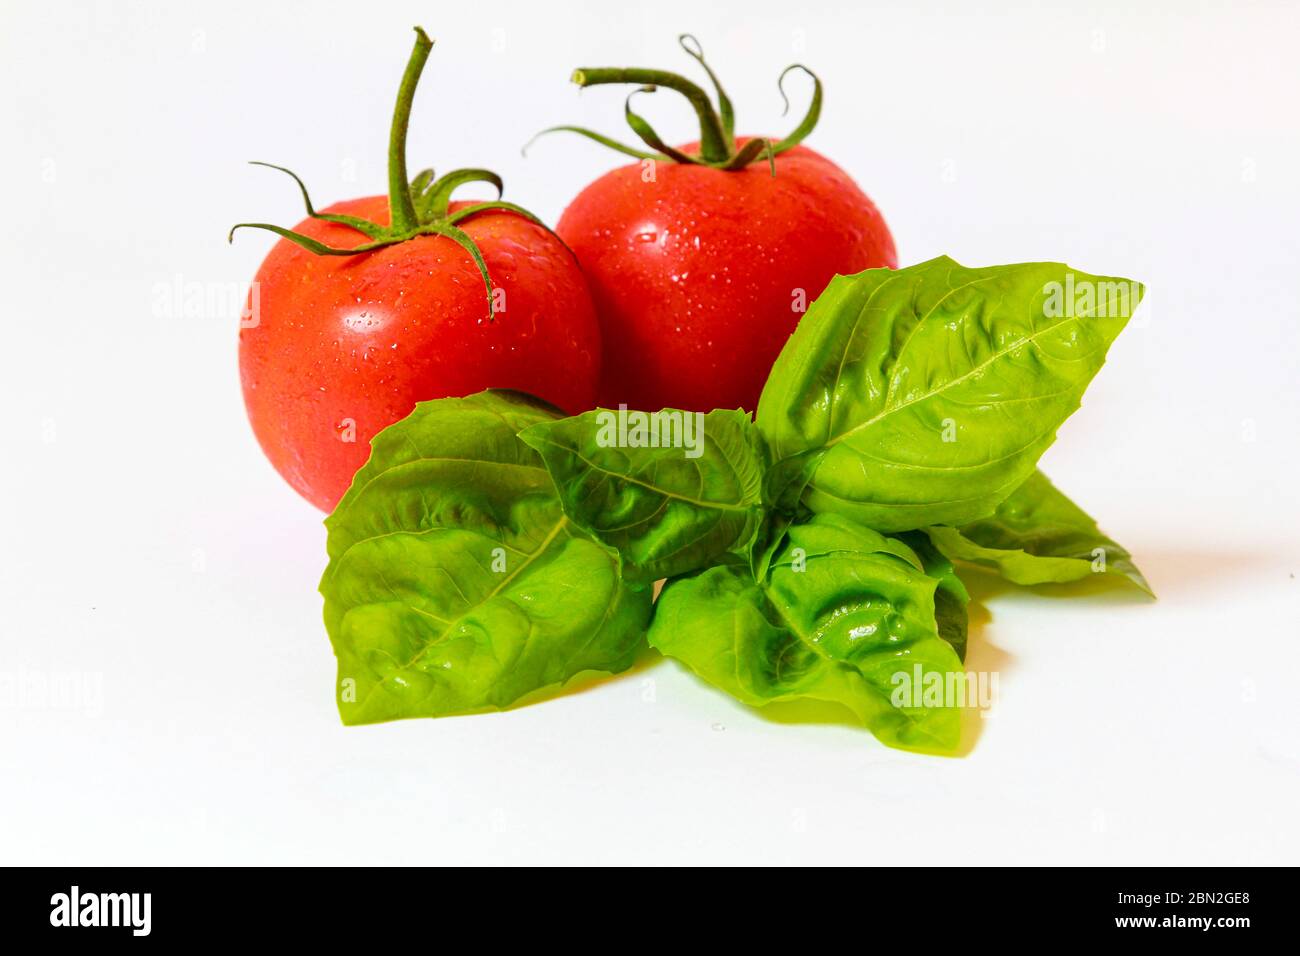 Two ripe red tomatoes with a fresh sprig of green basil isolated on white. Stock Photo